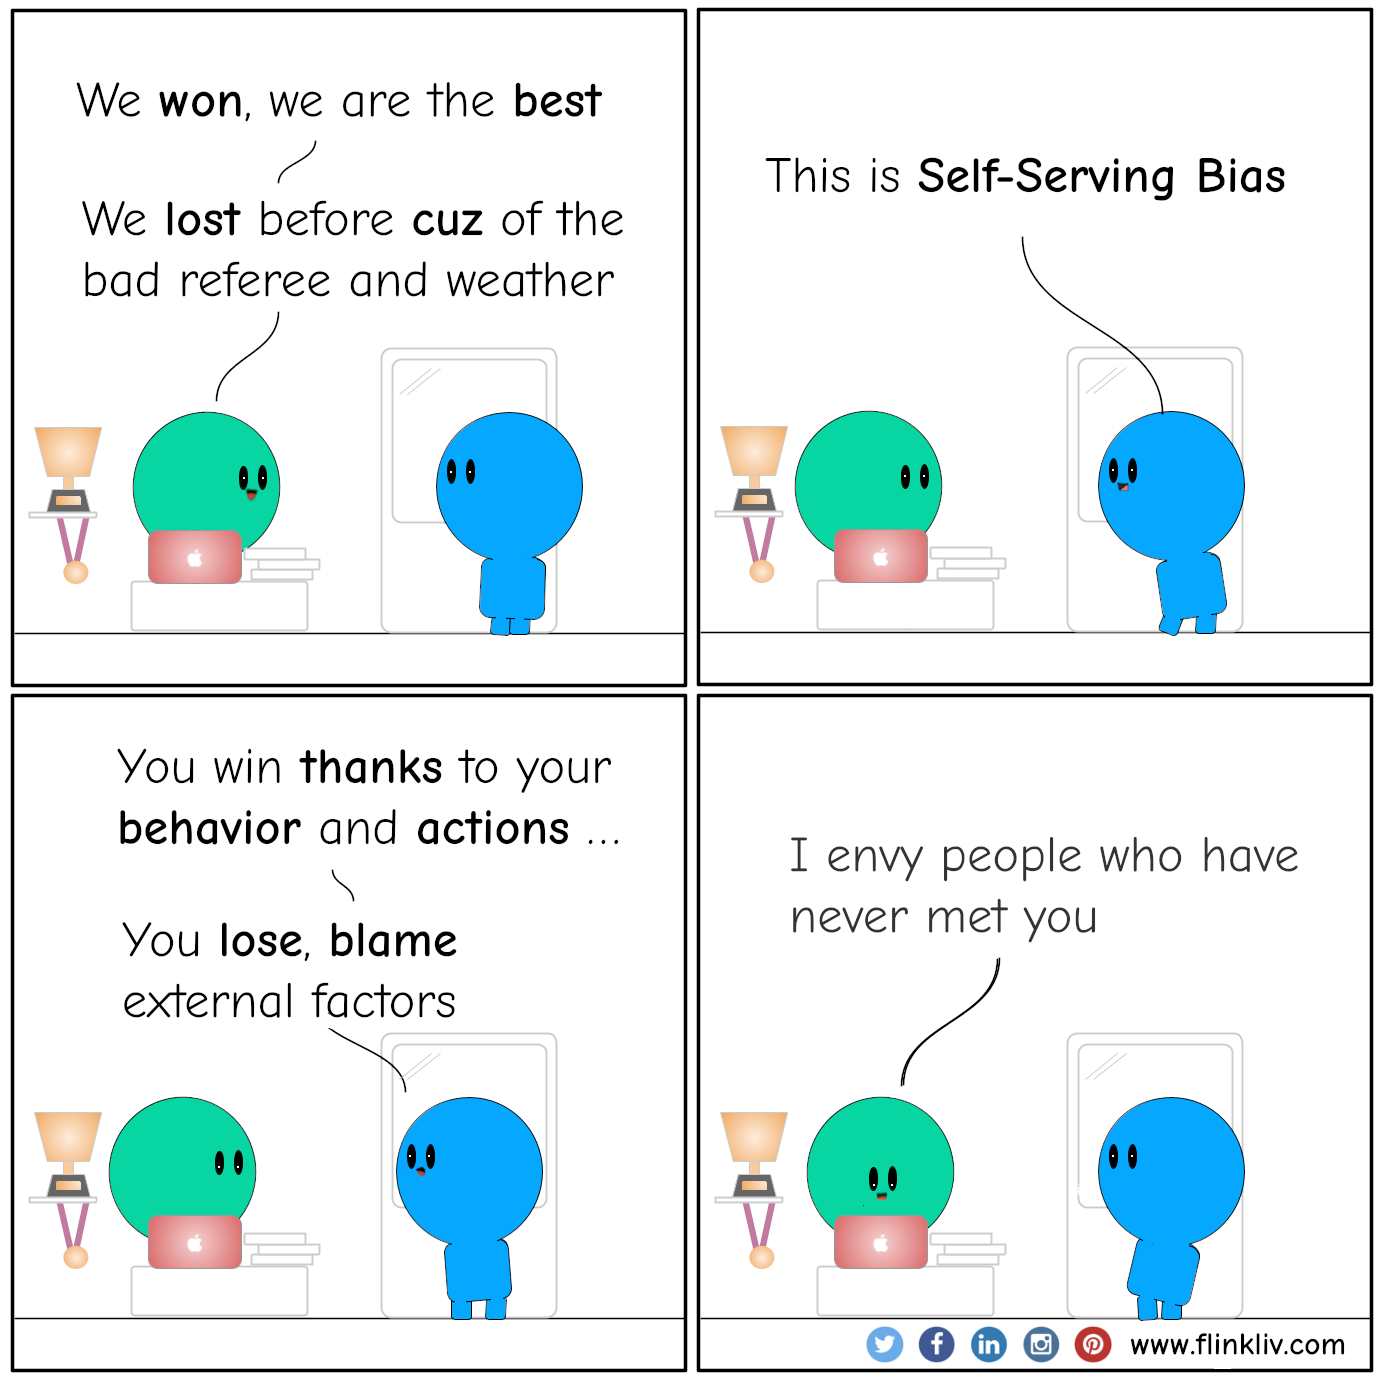 Conversation between A and B about the Self-Serving bias. B: How was the game? A: We won, we are the best. A: We lost before cuz of the bad referee, weather, injuries, etc. B: This is Self-Serving Bias. B: You win thanks to your behavior and actions; you lose, blame external factors, and it is not your fault. A: I envy people who have never met you.
				By Flinkliv.com